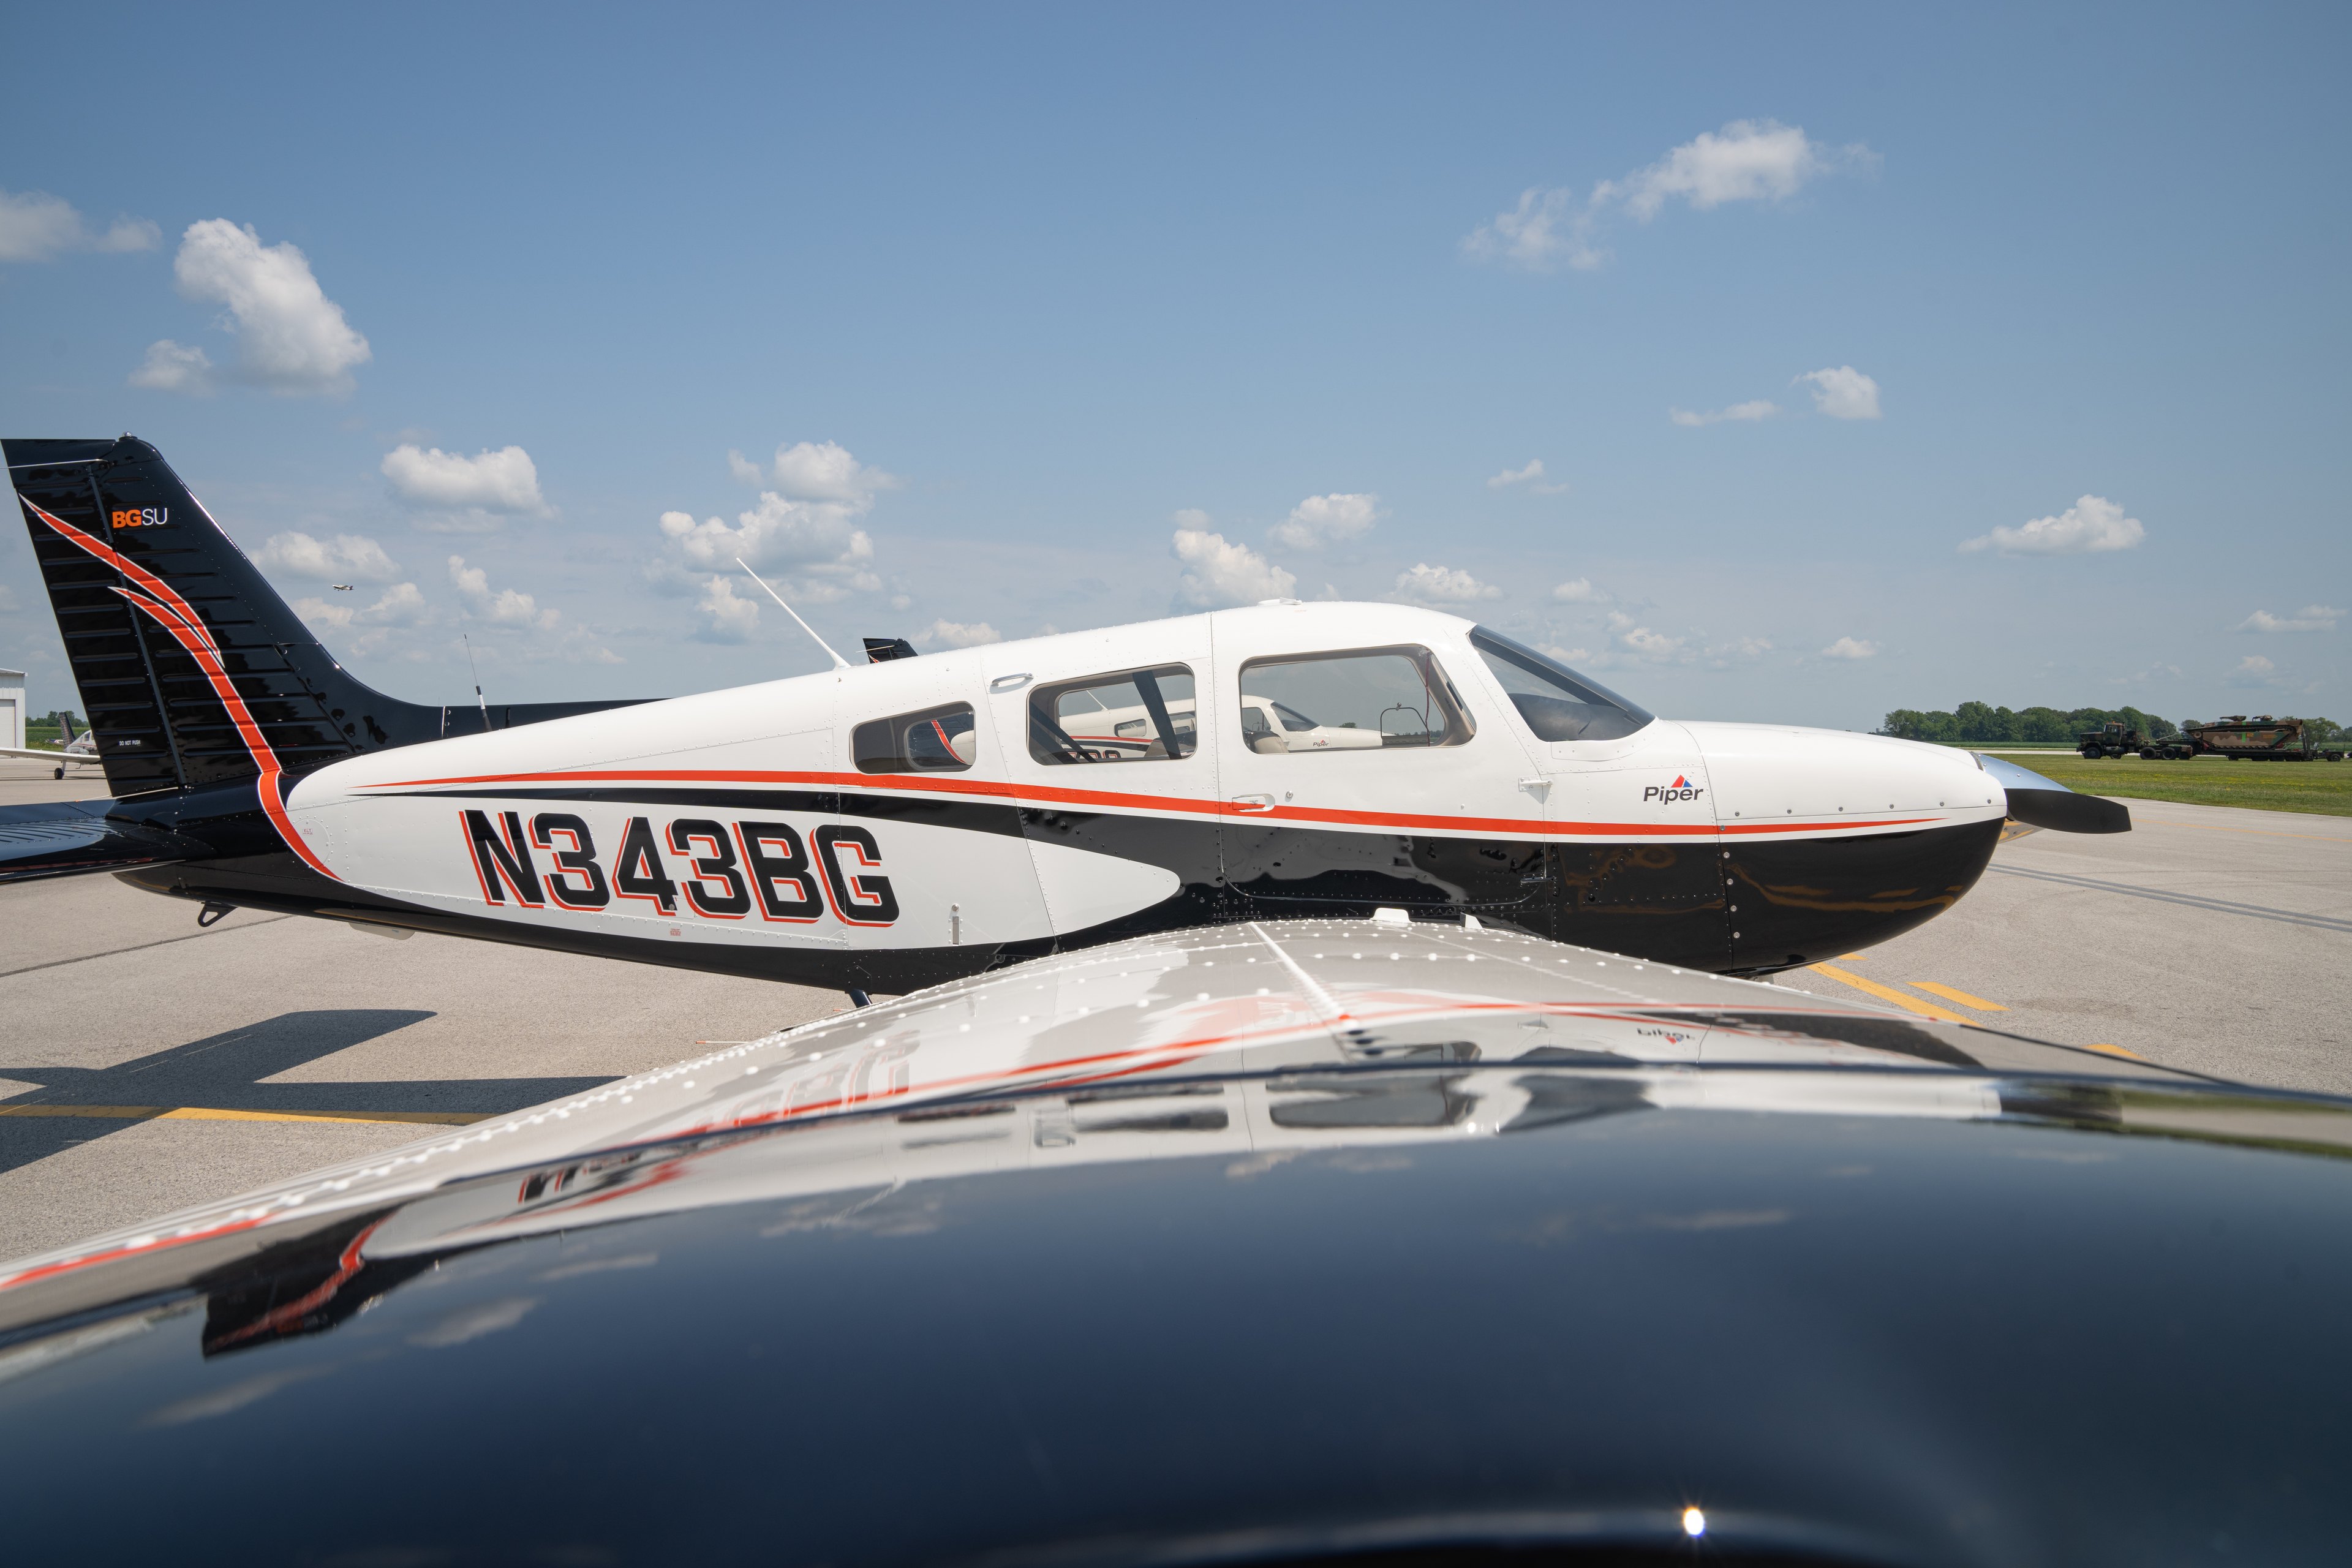 New Piper Archer airplanes at the BG Flight Center